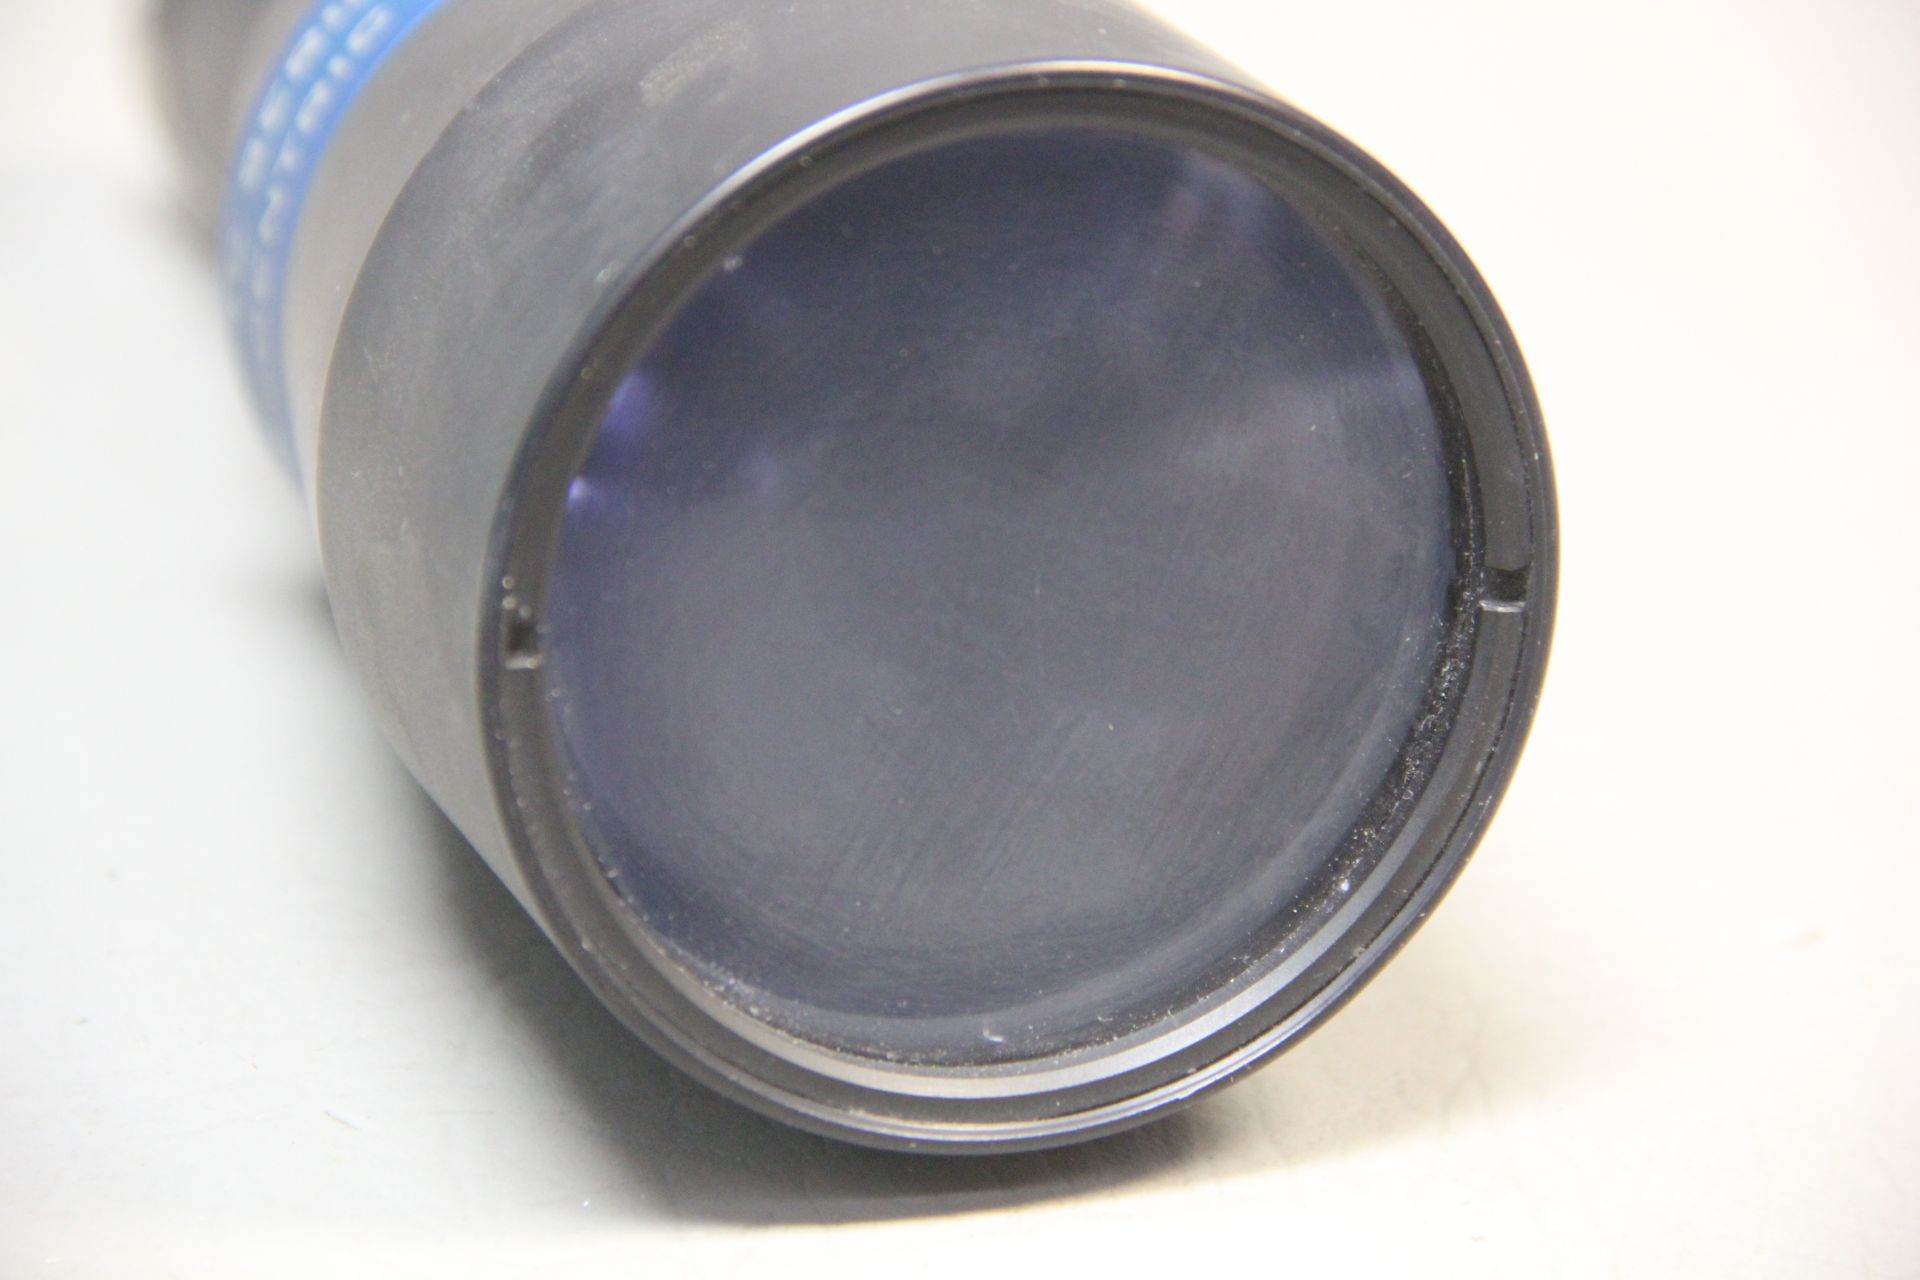 3 OPTO ENGINEERING TELECENTRIC LENSES - Image 3 of 6